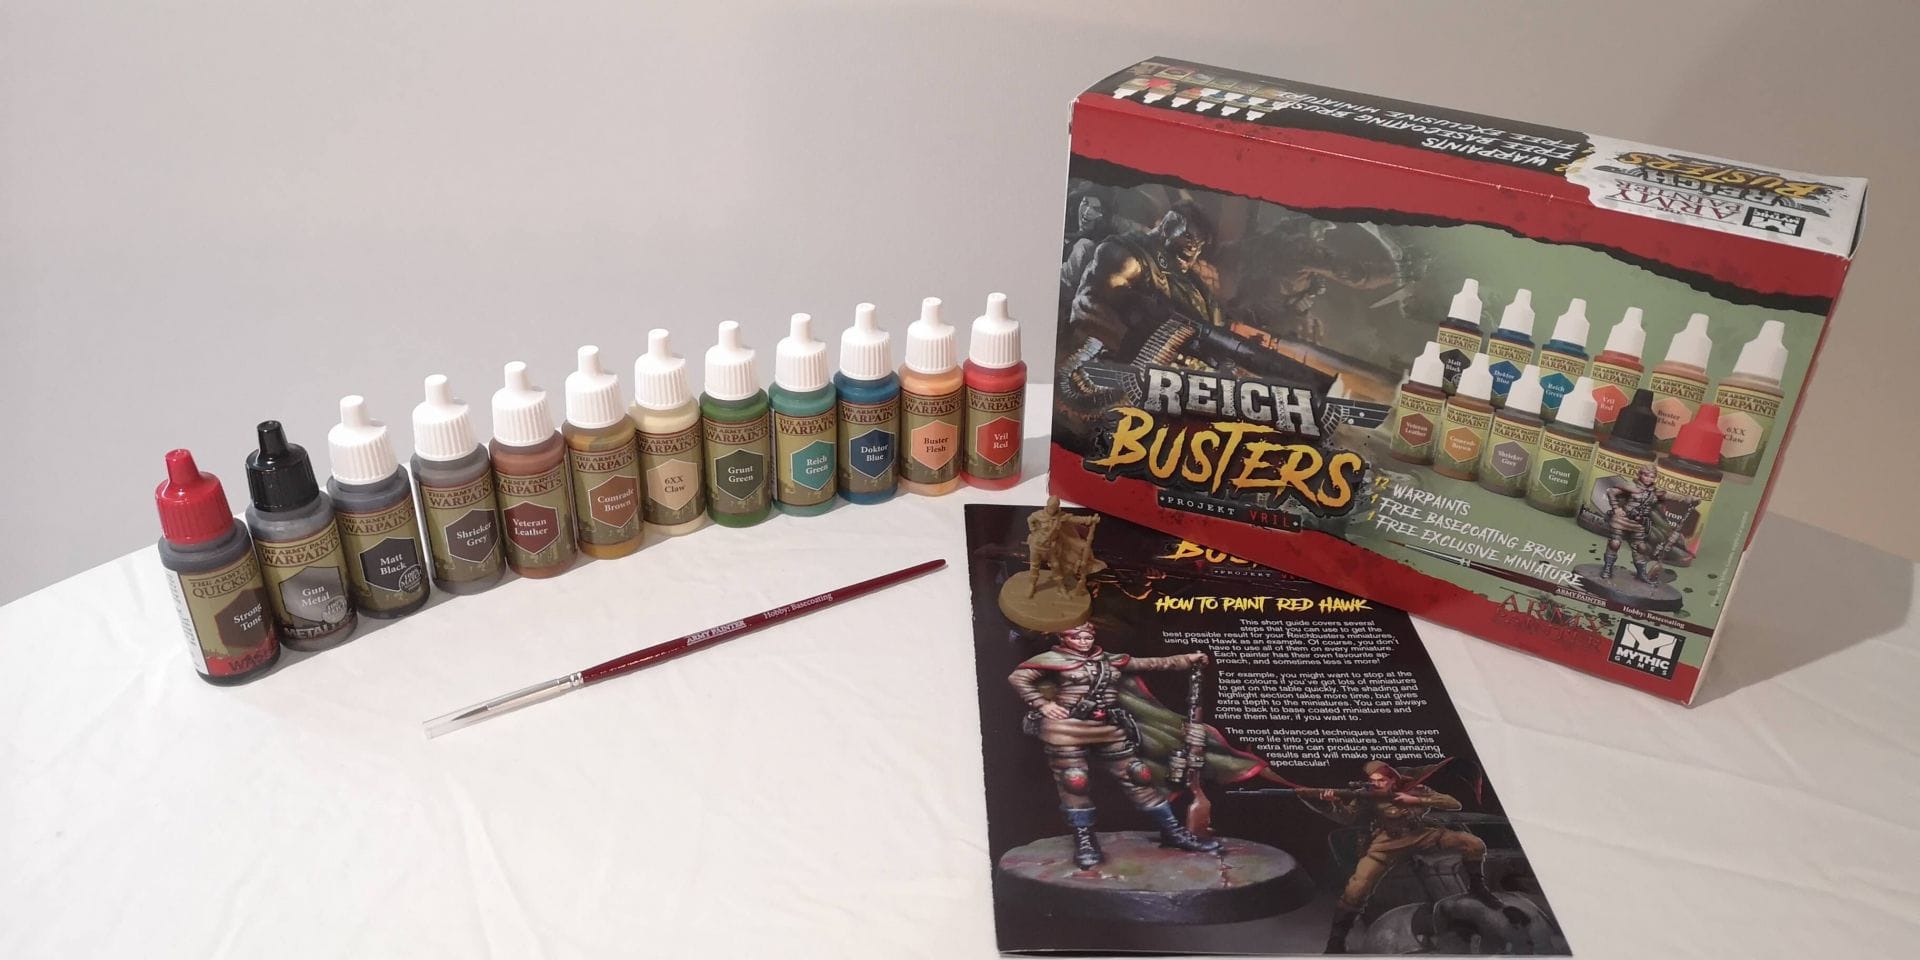 Reichbusters Army Painter Set